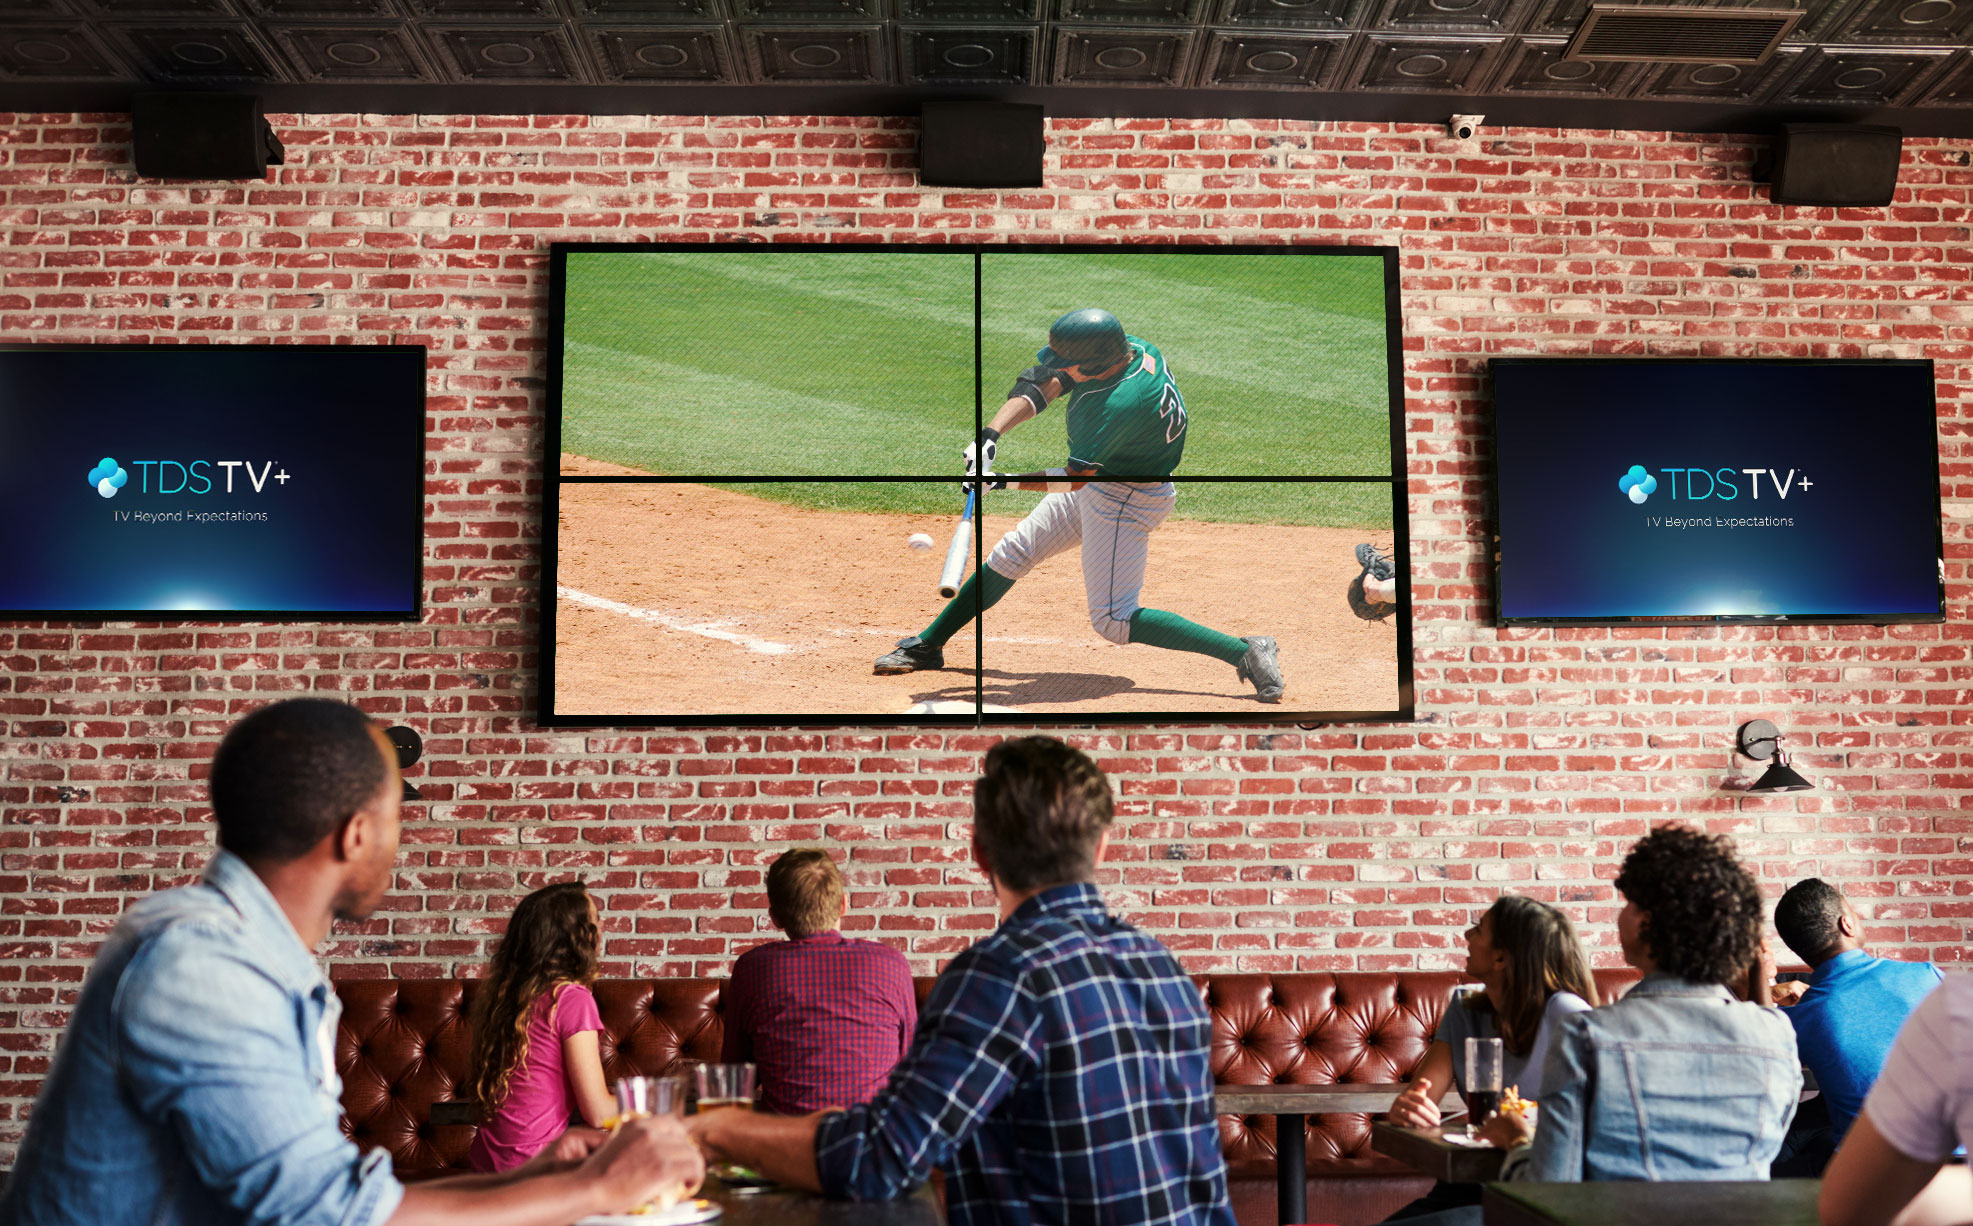 Group of people at a restaurant/bar watching baseball on a four panel TV